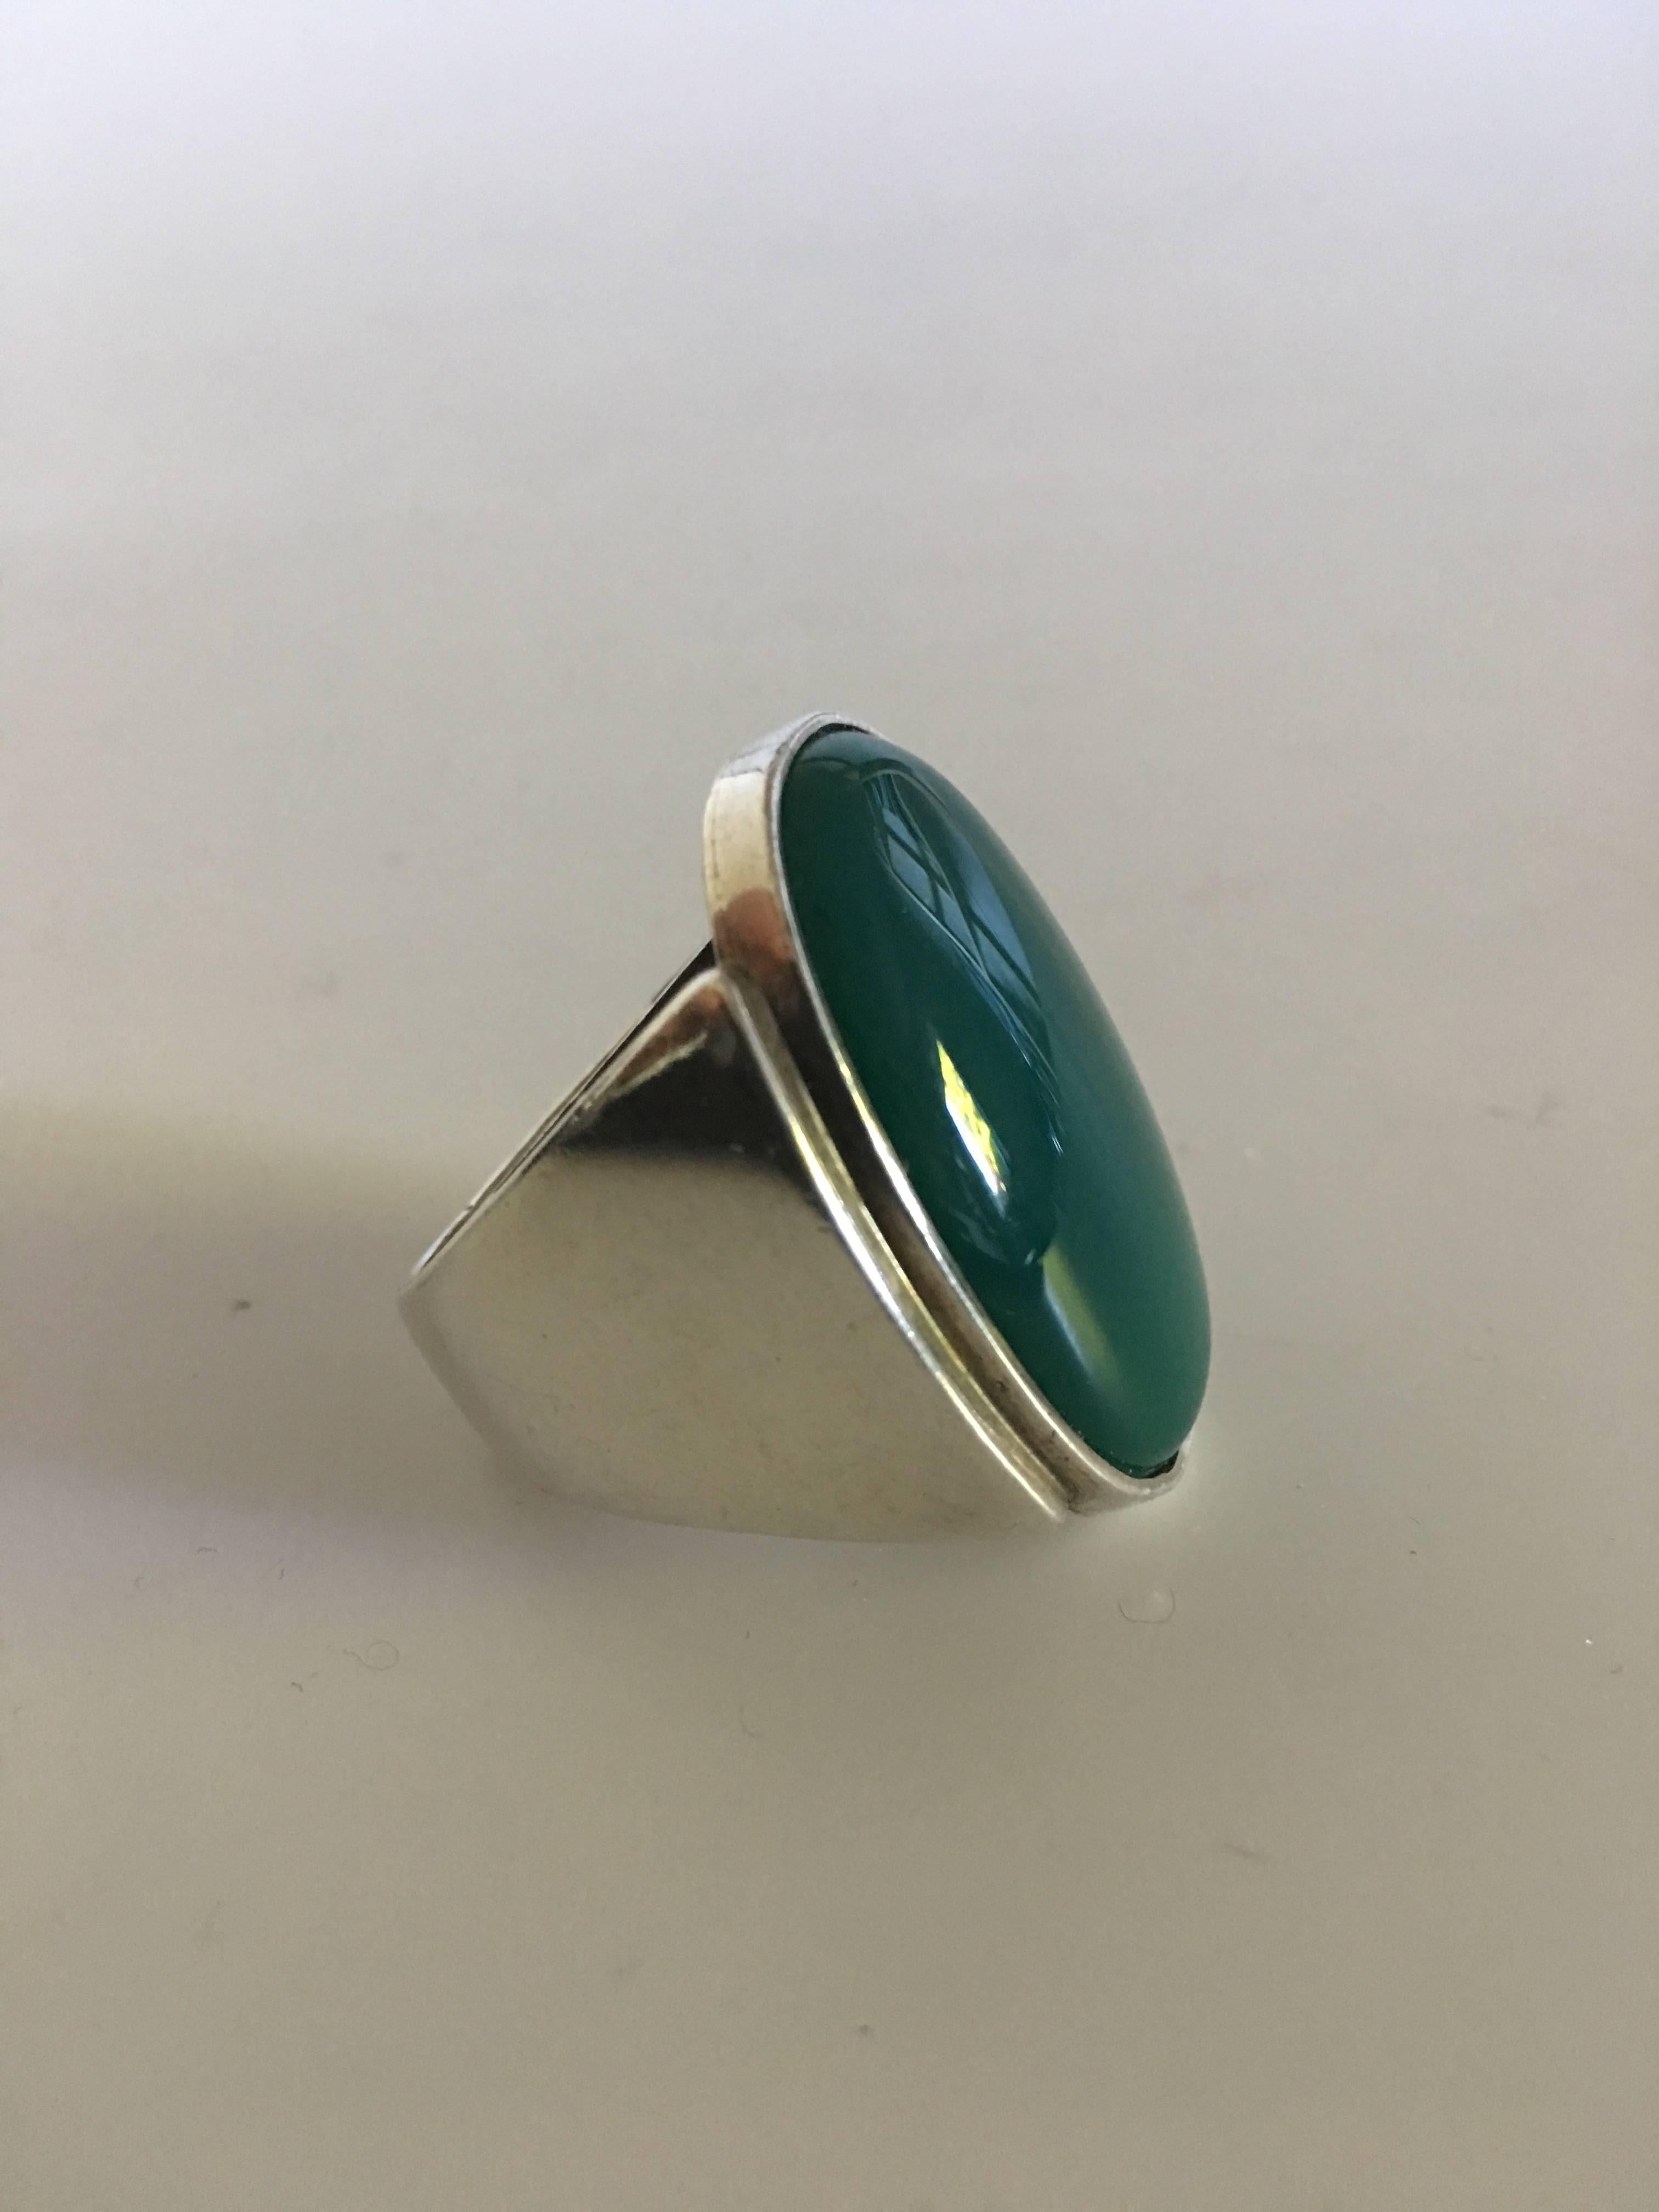 Large Georg Jensen Sterling Silver Ring No. 209 with Green Agate. Stone measures 3.4 cm (1 11/32